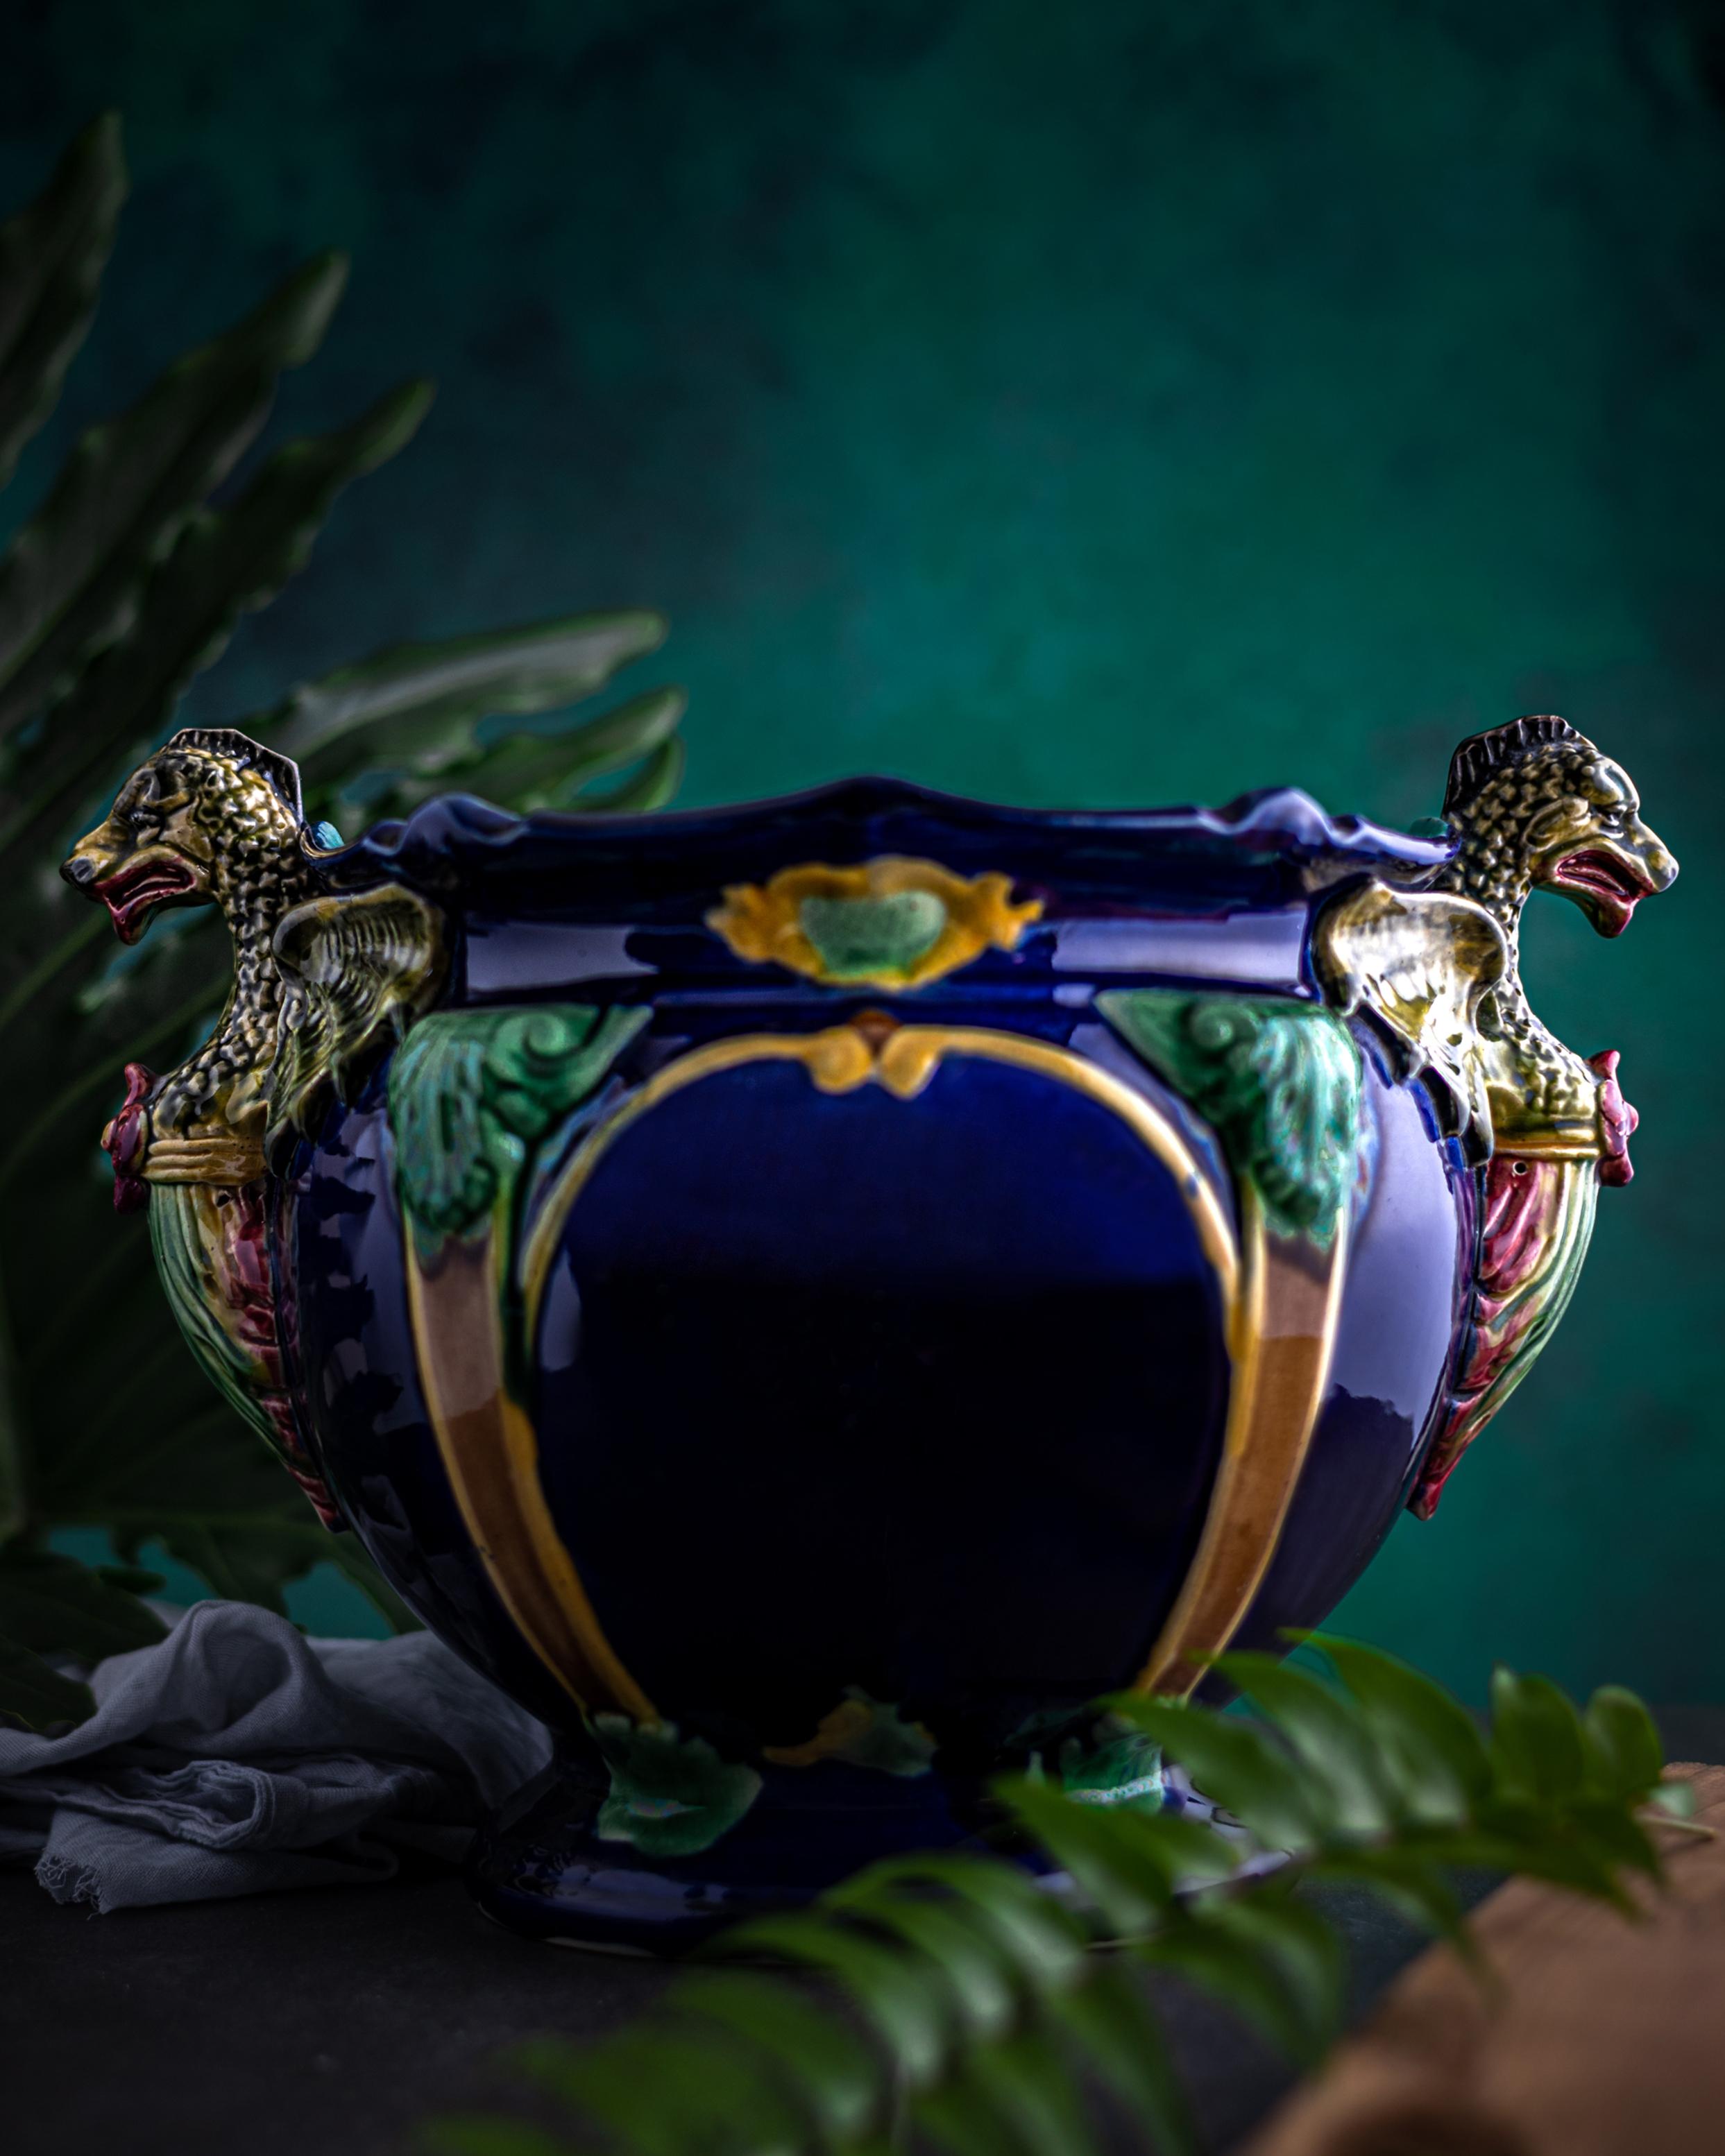 A cobalt blue Majolica jardiniere made by Thomas Forester & Sons circa 1888 in the Revivalist style. The jardiniere features Gothic-style dragon handles and Renaissance-style architectural designs.

Revivalist styles became quite popular during